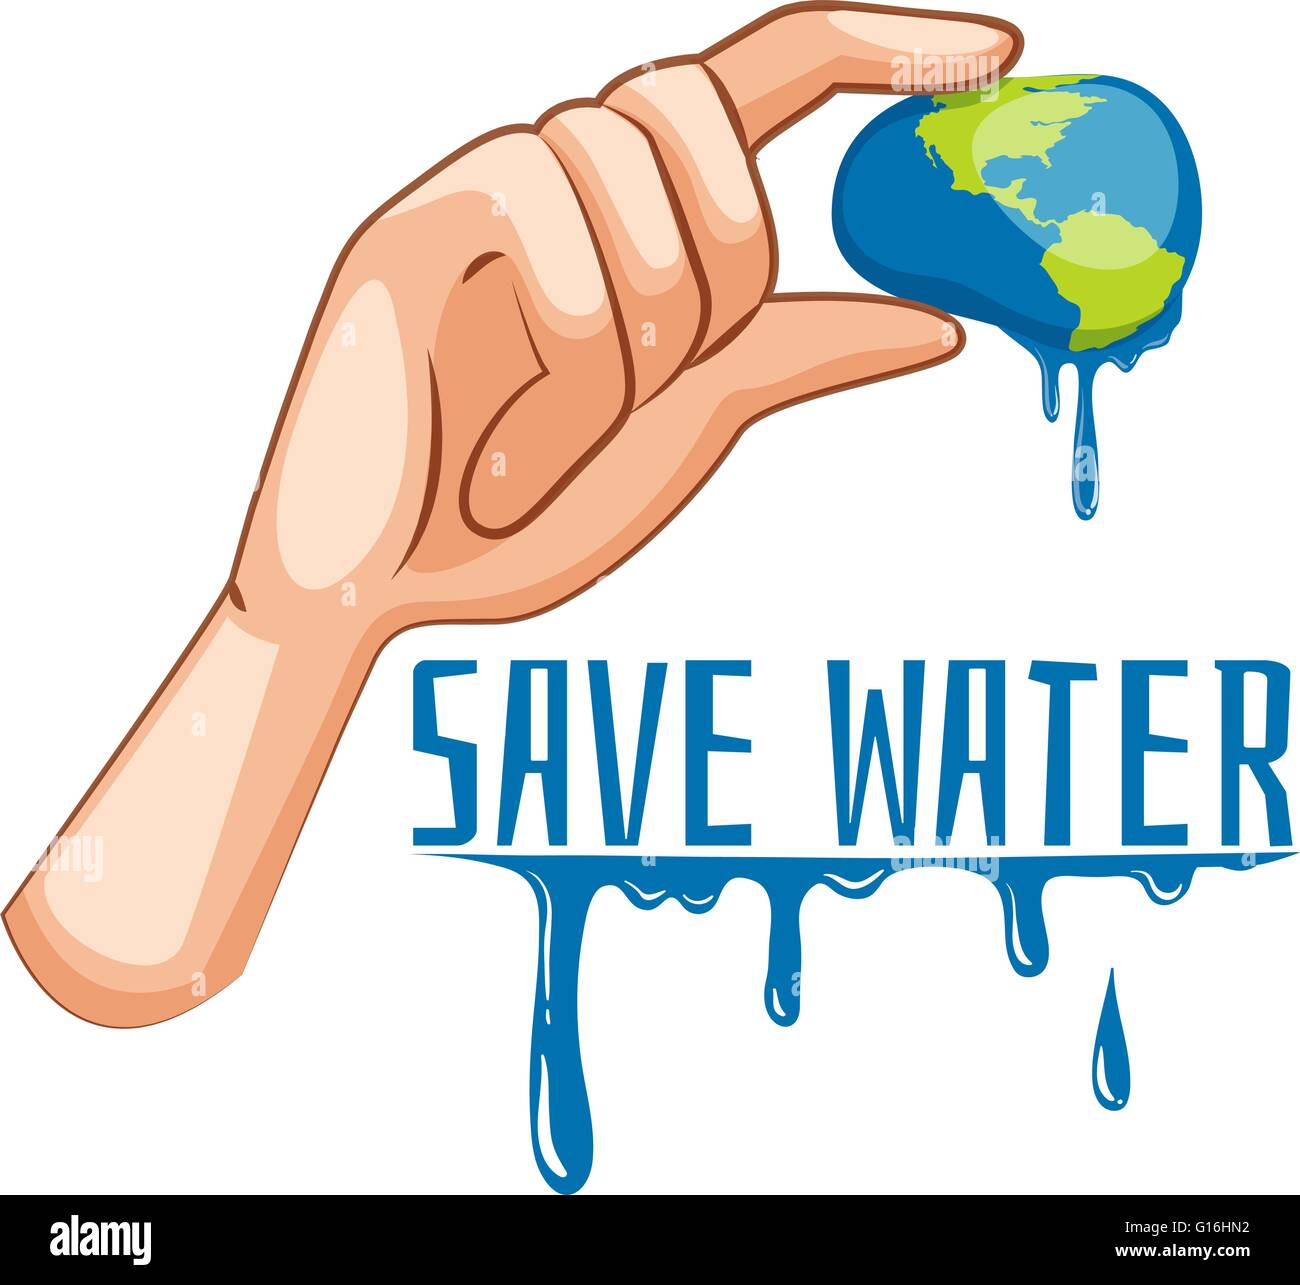 Save water Cut Out Stock Images & Pictures - Alamy